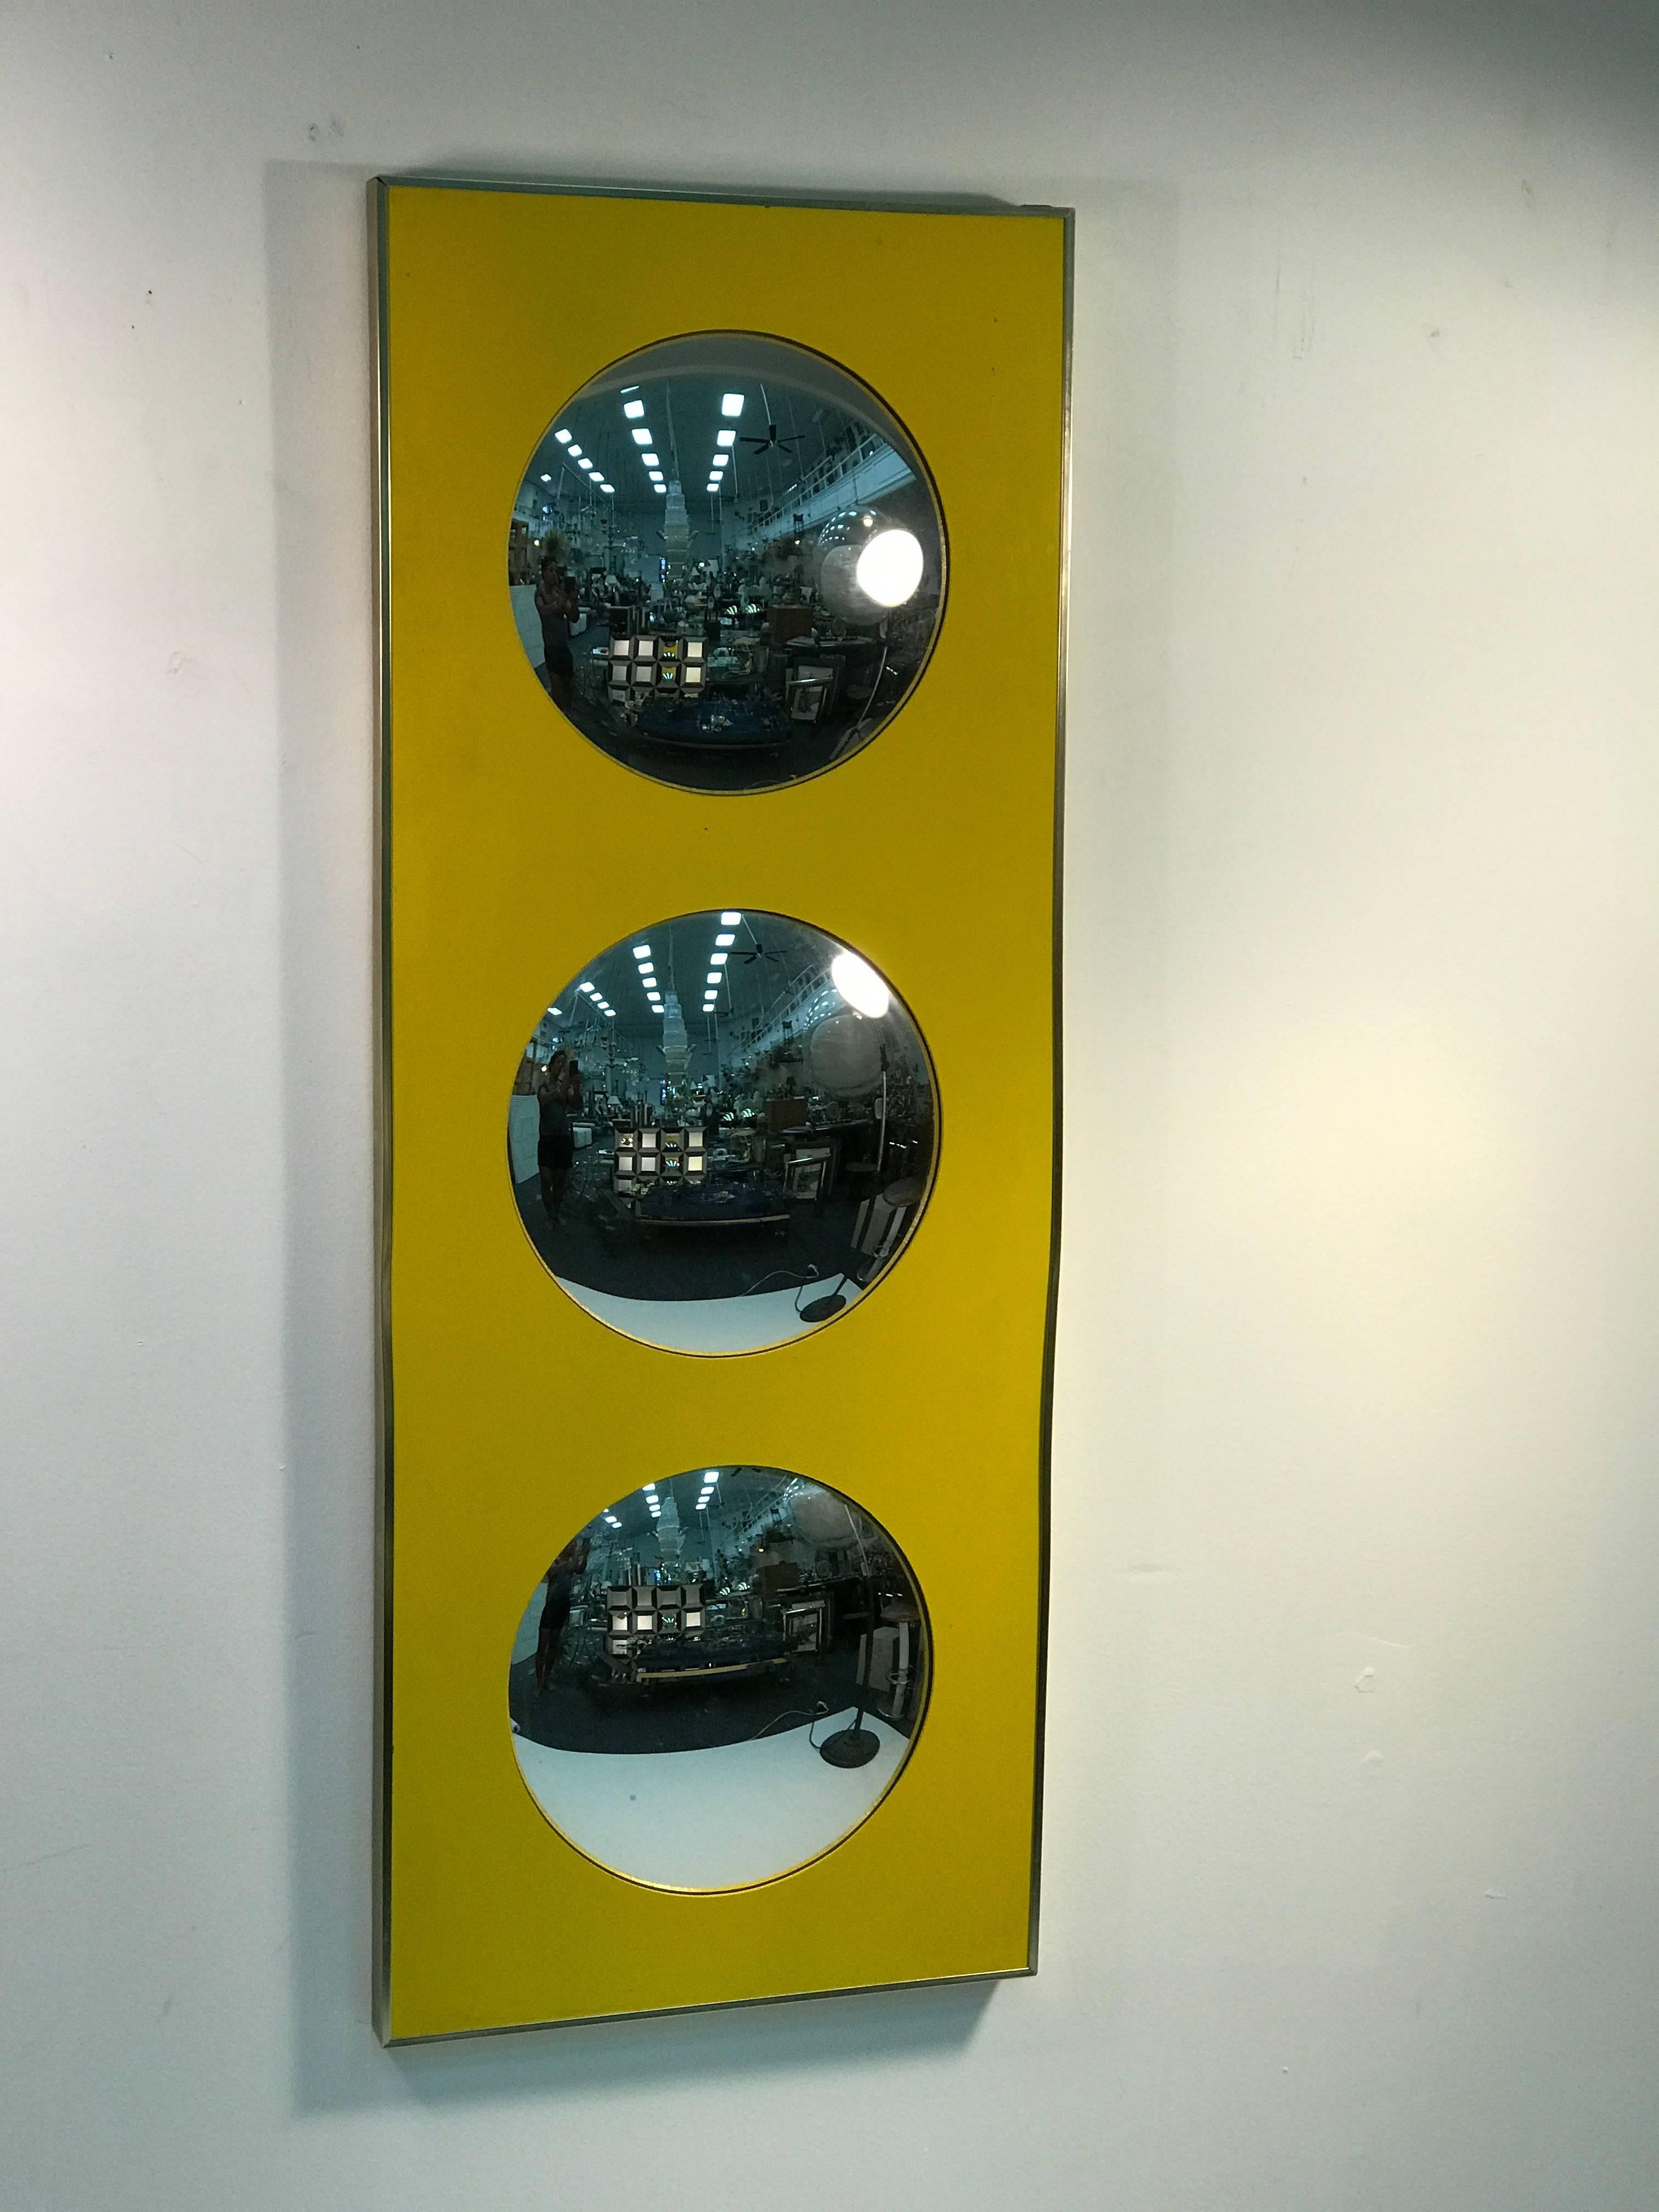 Iconic Pop Art Bubble Framed Wall Mirror by Turner In Good Condition For Sale In Mount Penn, PA